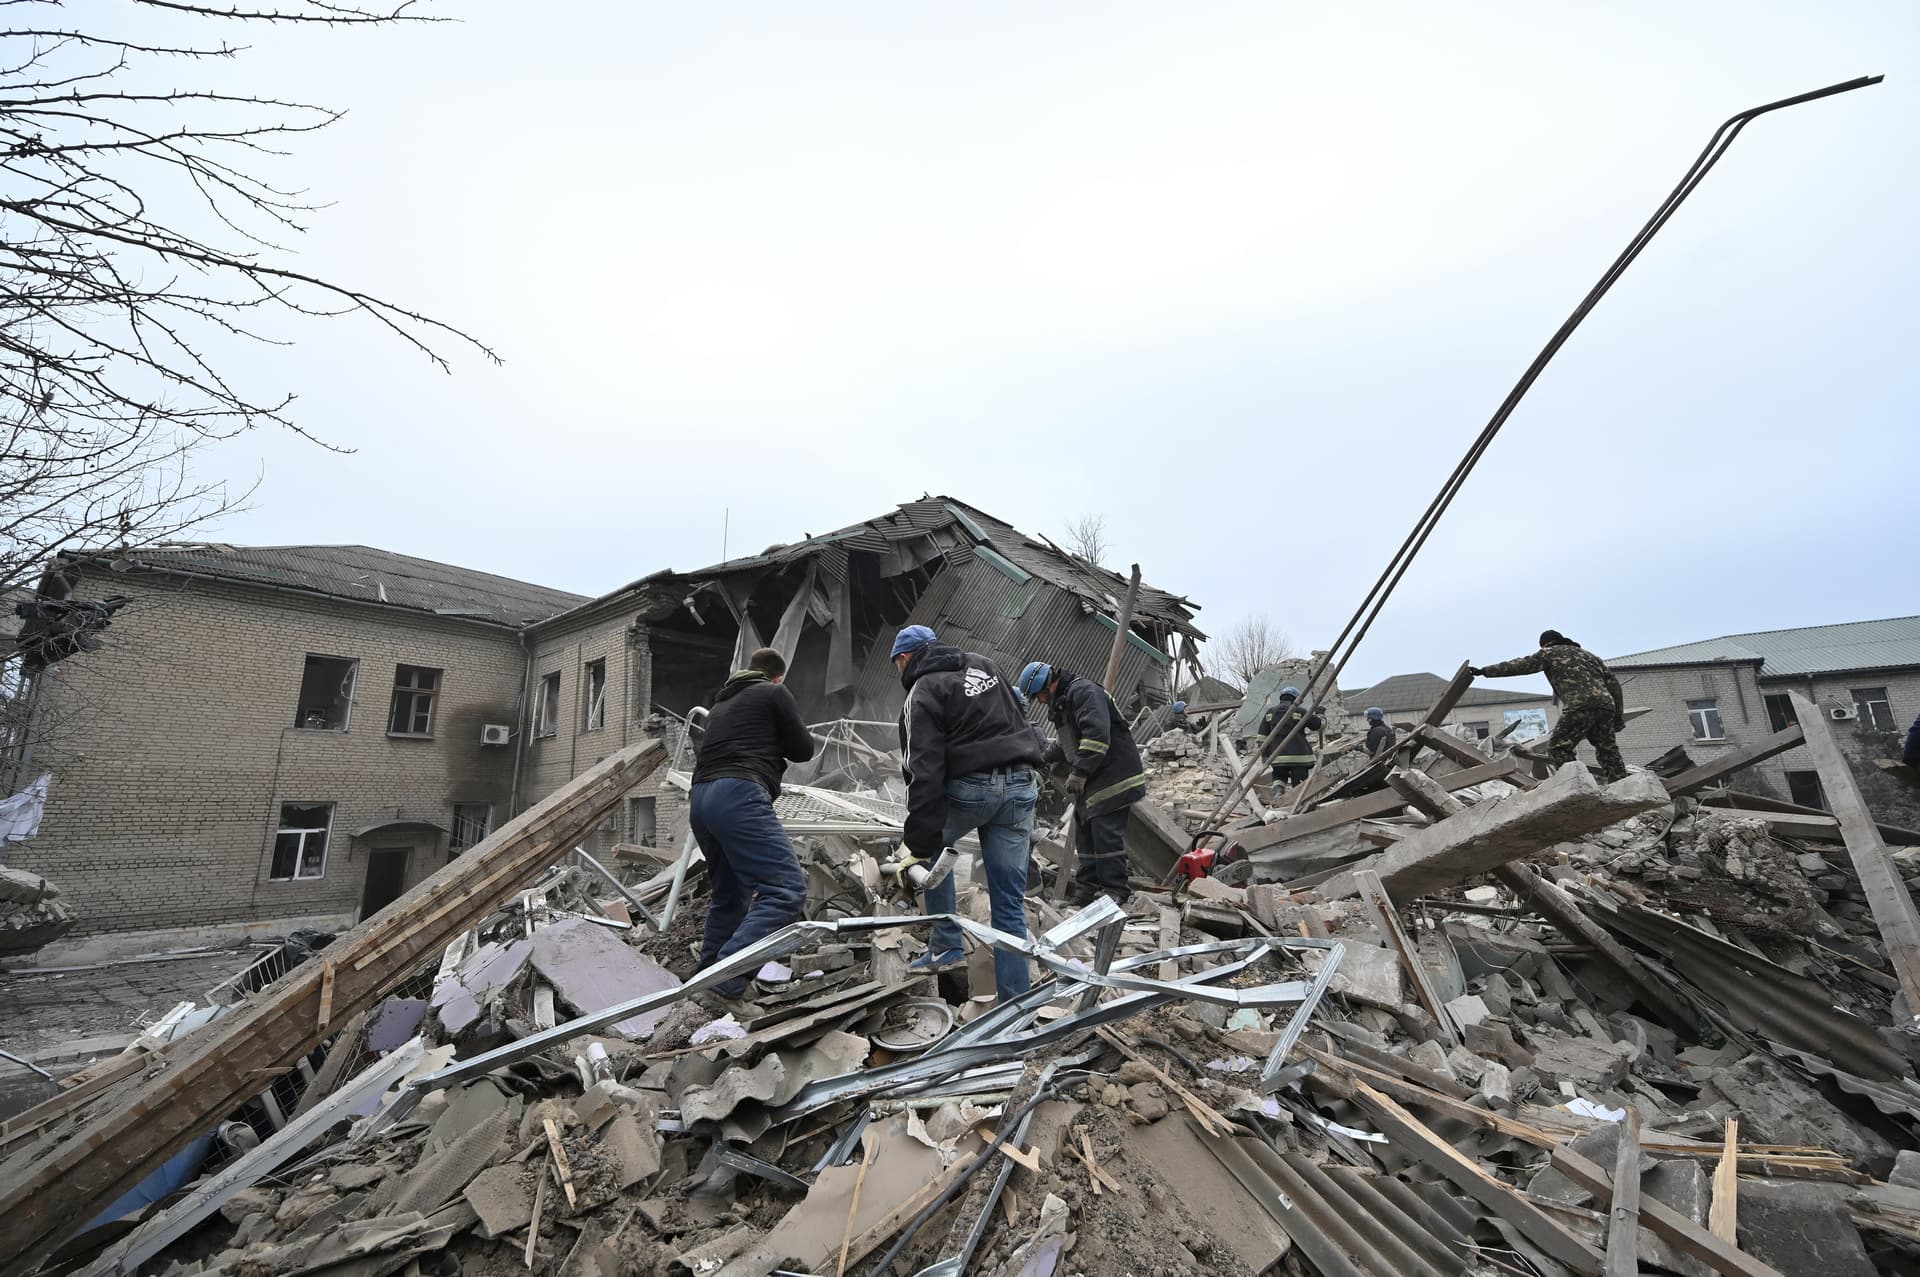 Rescuers work at the site of a maternity ward of a hospital destroyed by a Russian missile attack in Vilniansk